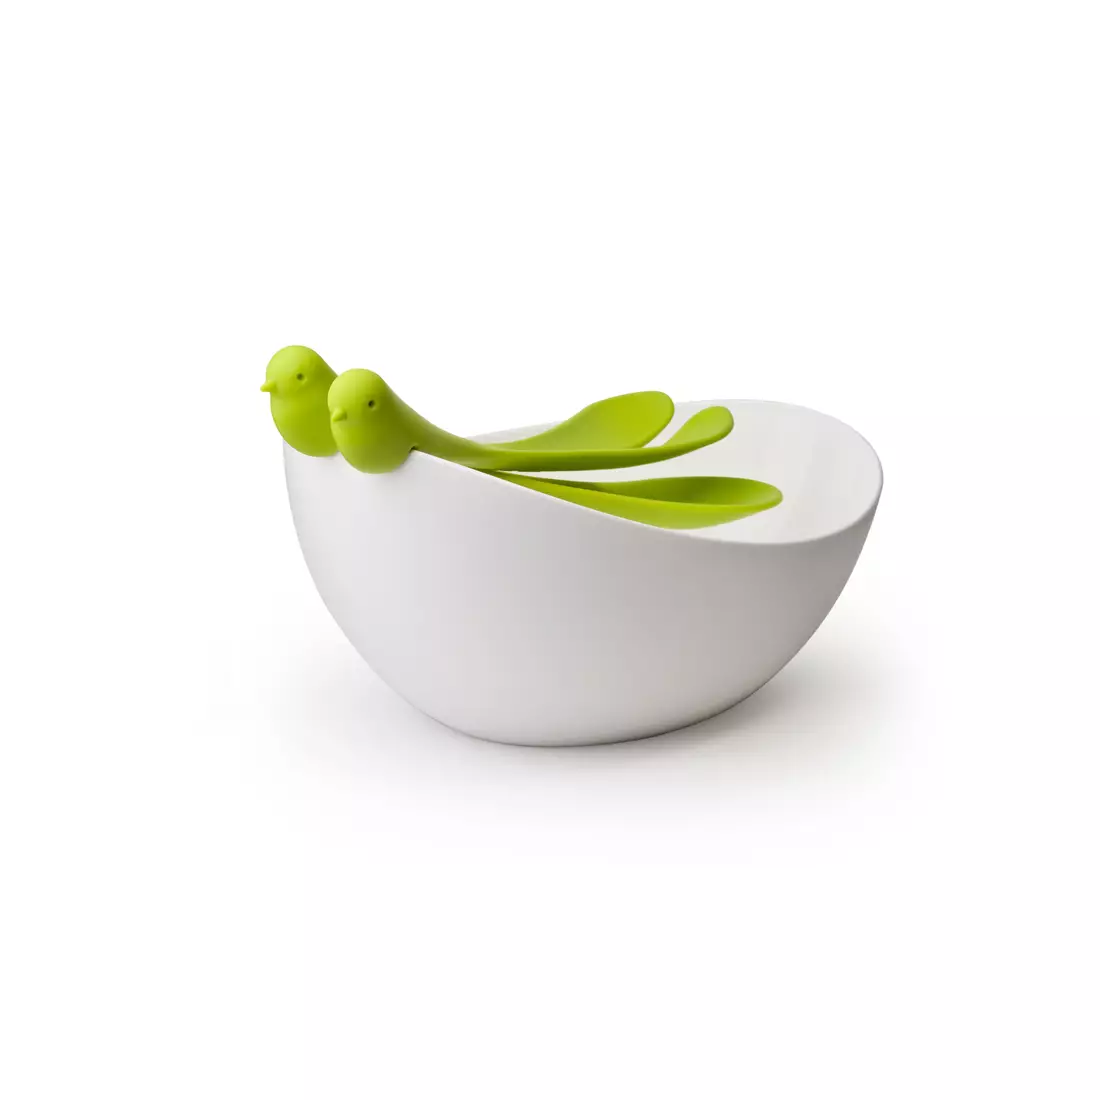 QUALY bowl with salad spoons, white and green